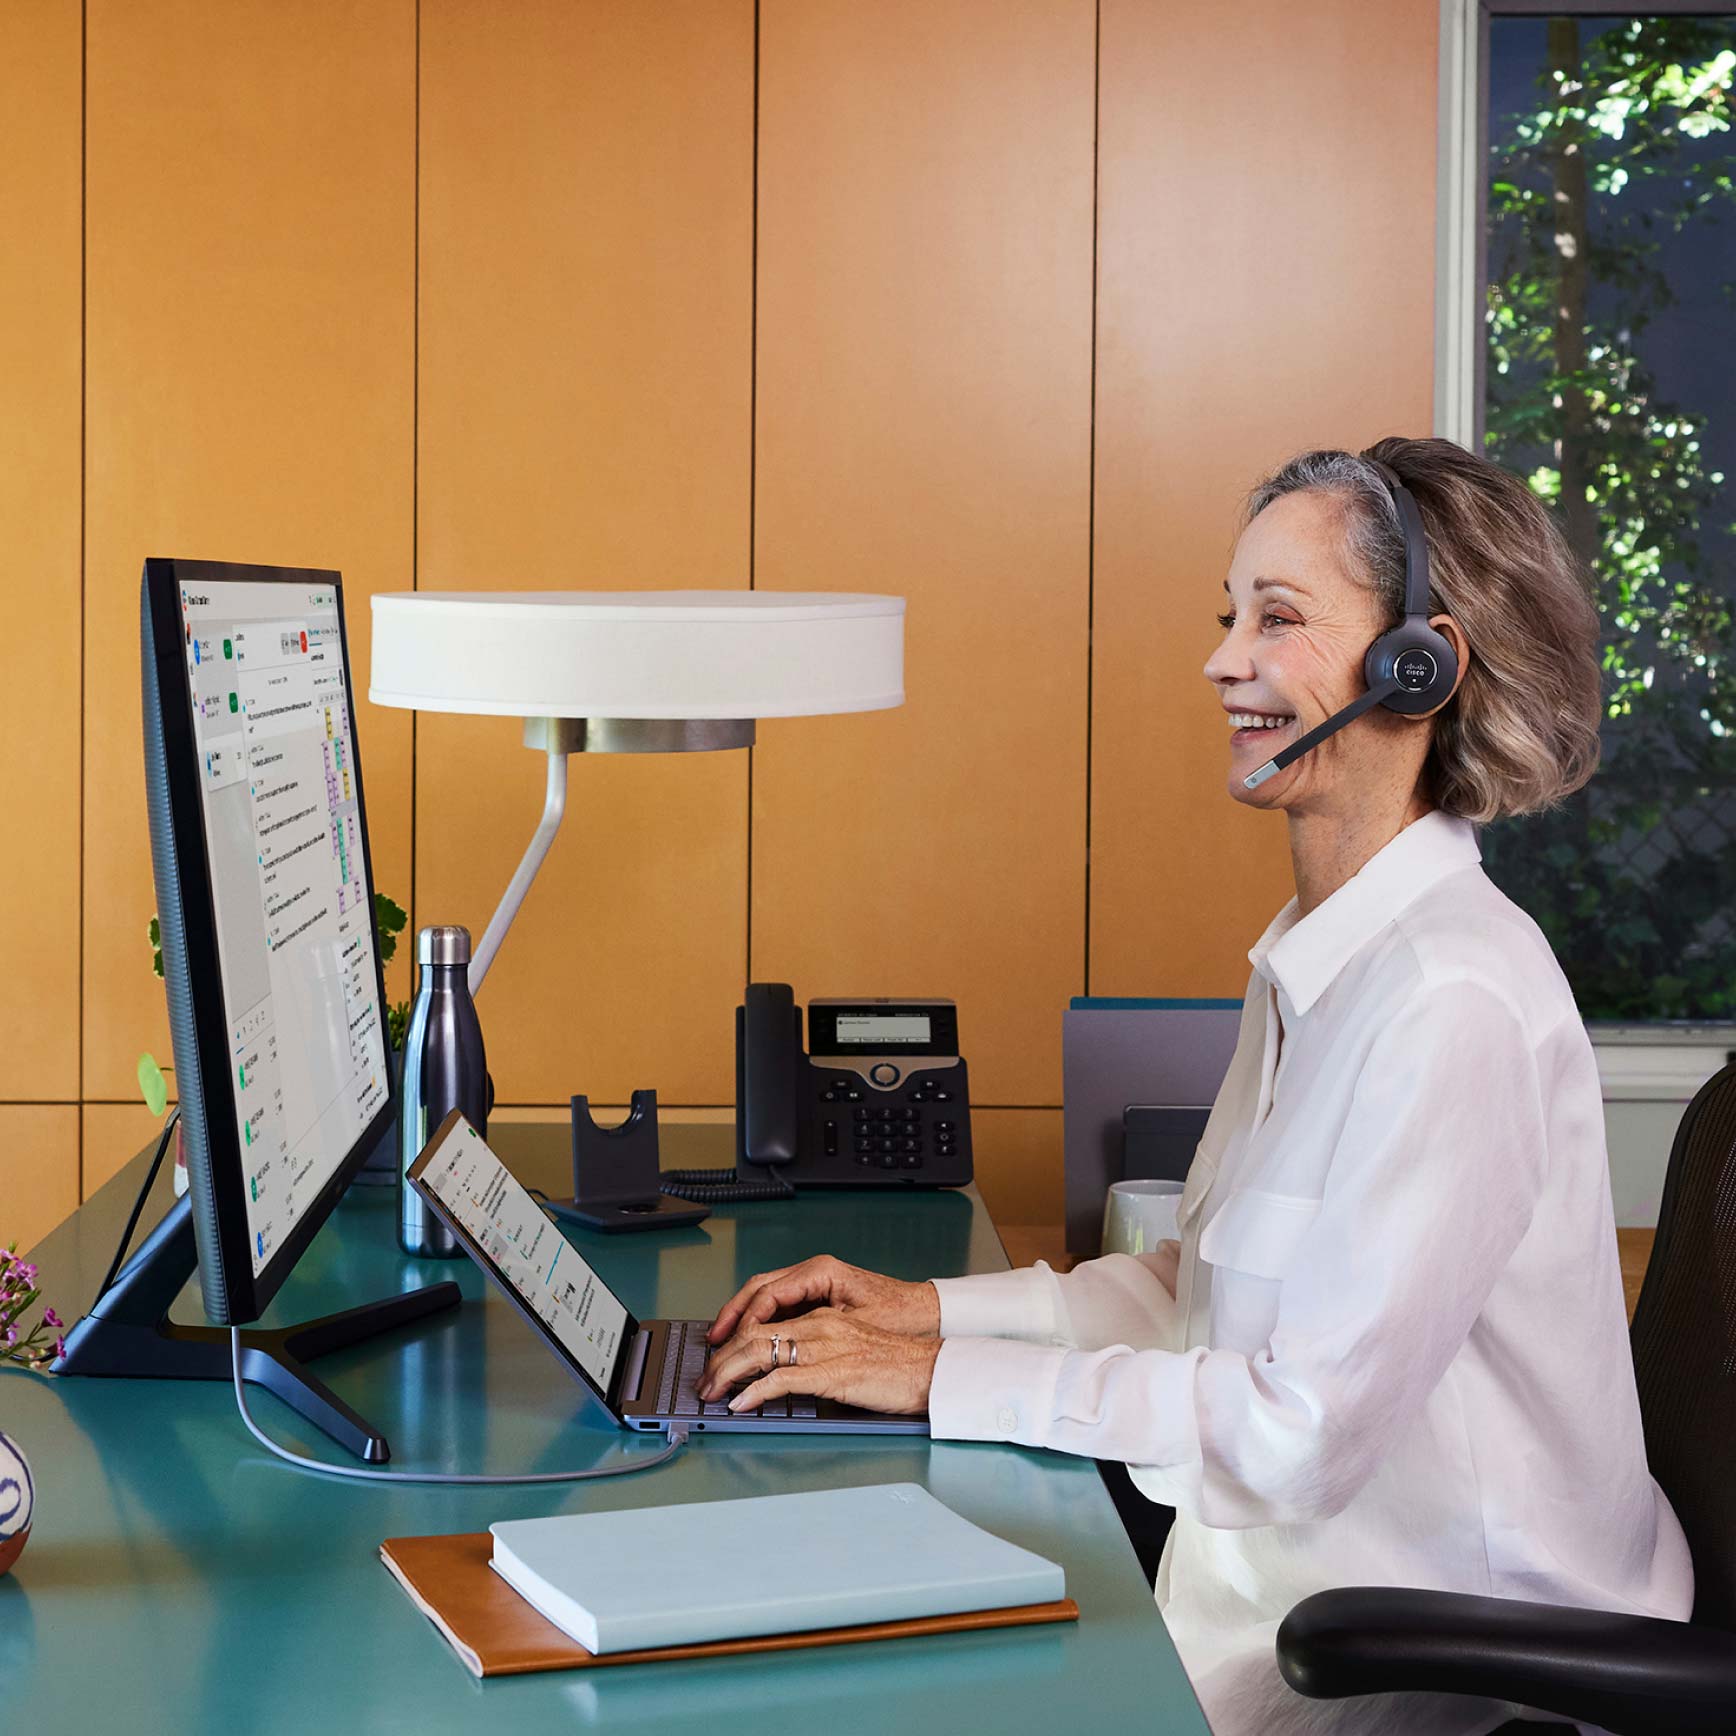 User engages with the Webex Contact Center